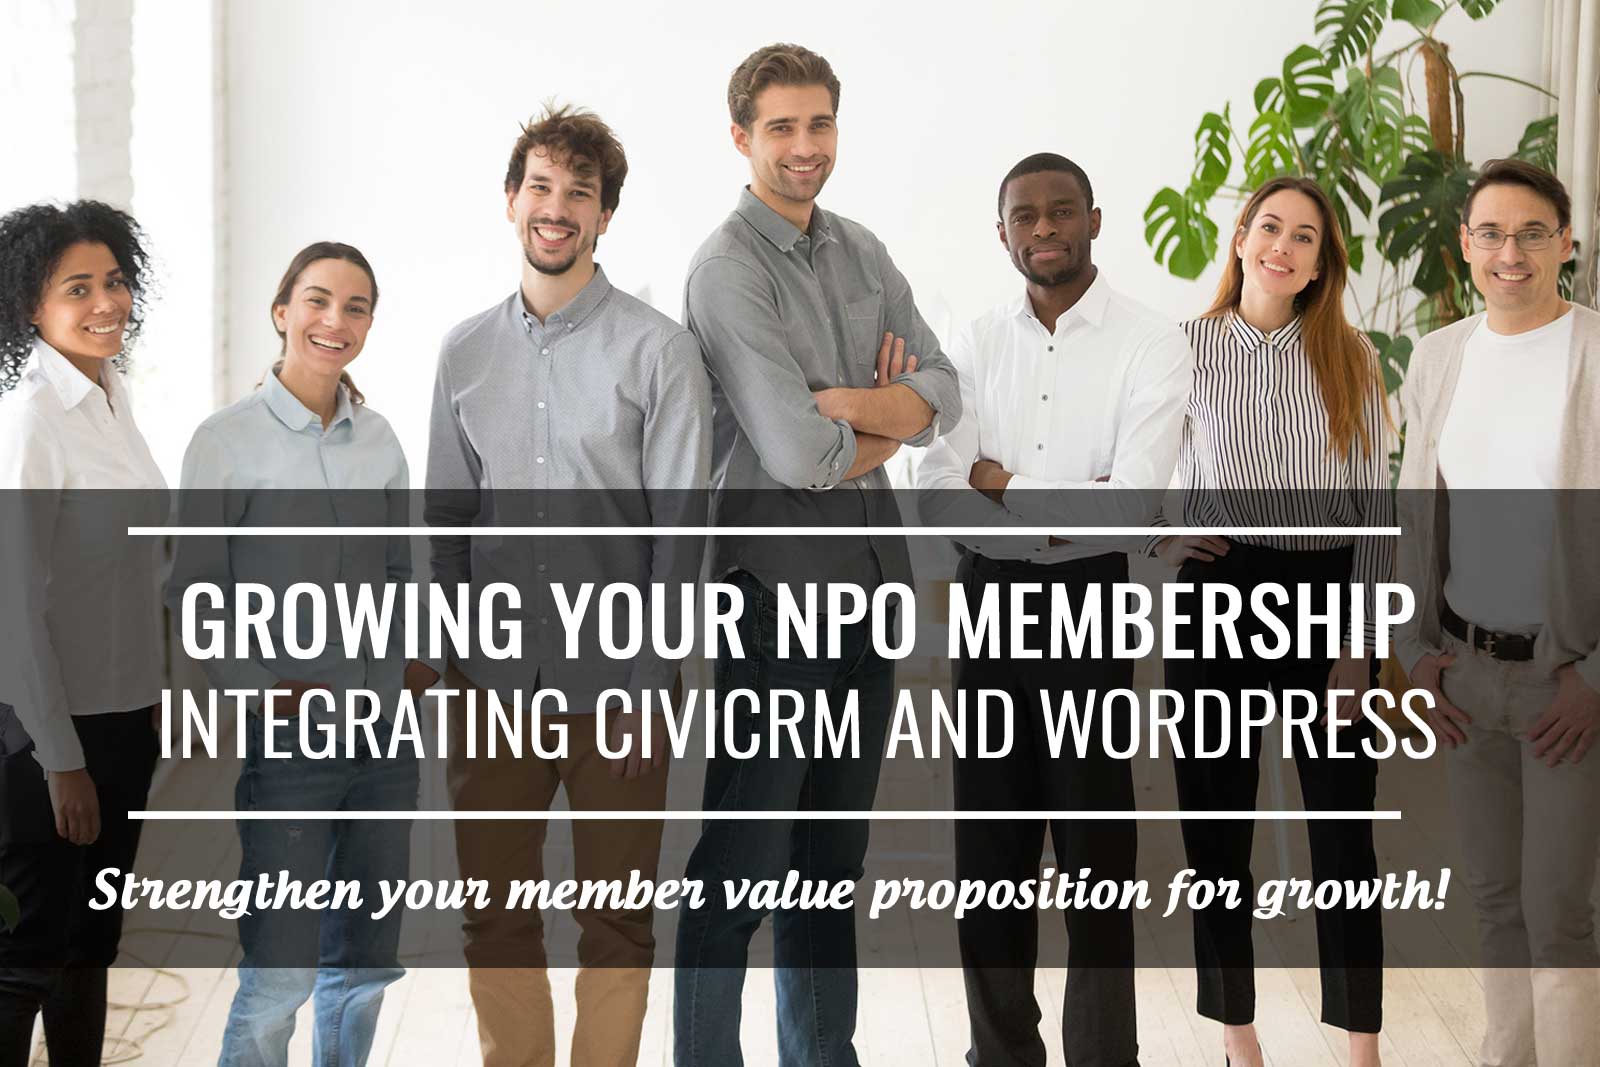 Member value. Growing your membership. CIVICRM.